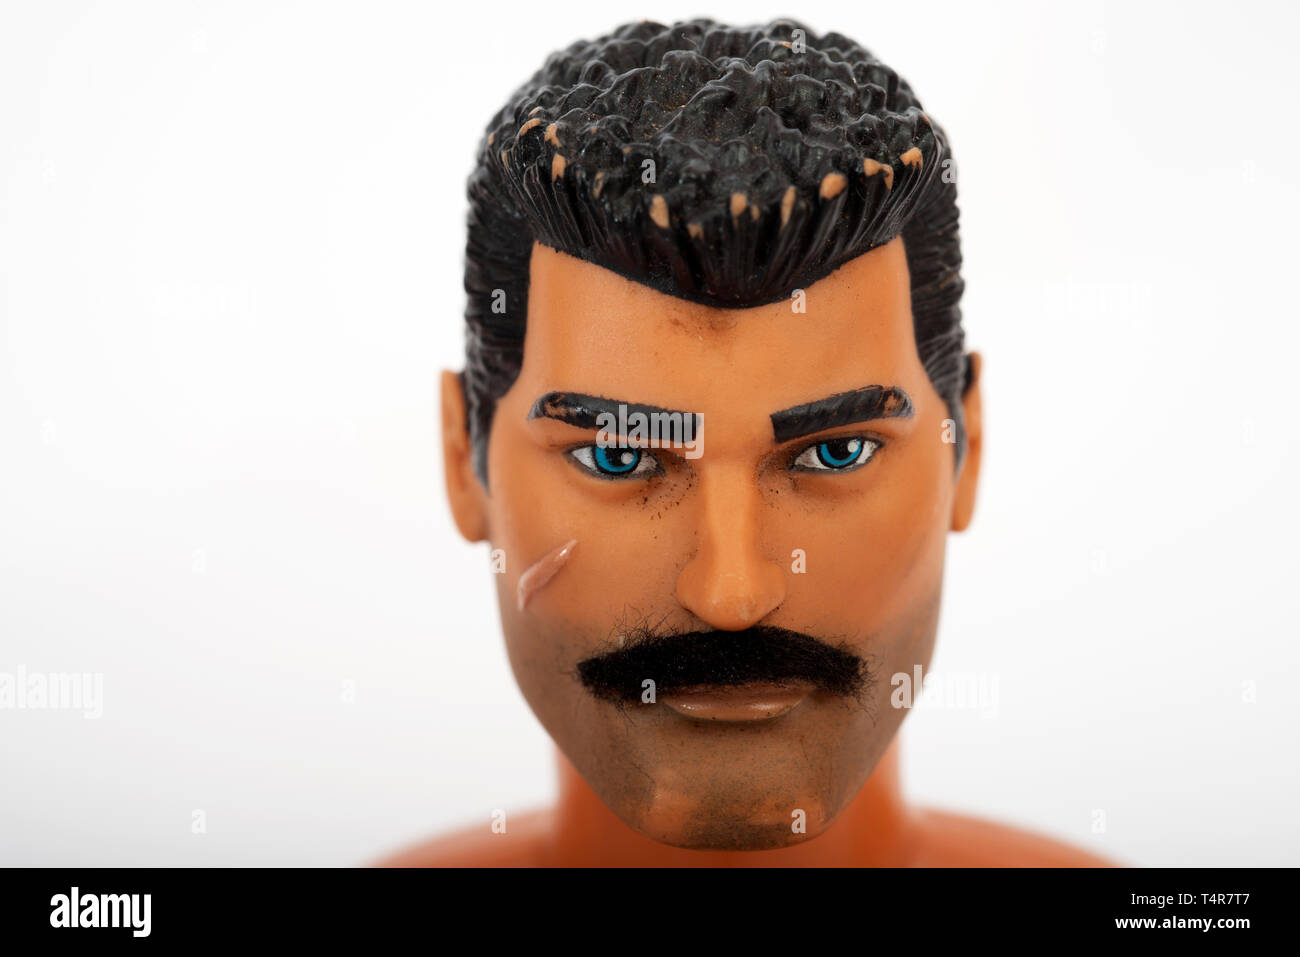 Action Man toy with homemade moustache Stock Photo